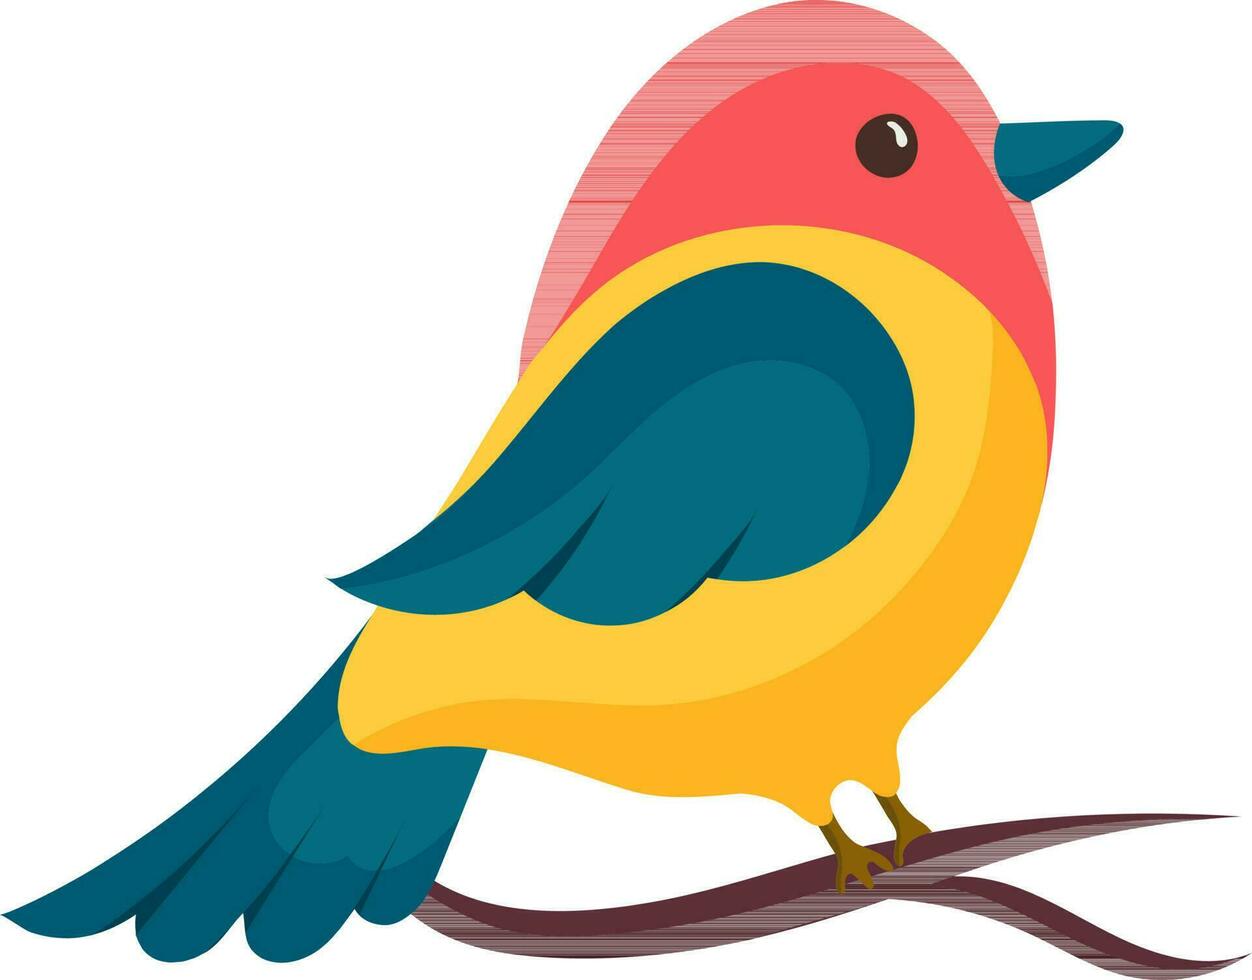 Character of Cute Bird Sitting On Branch In Colorful. vector